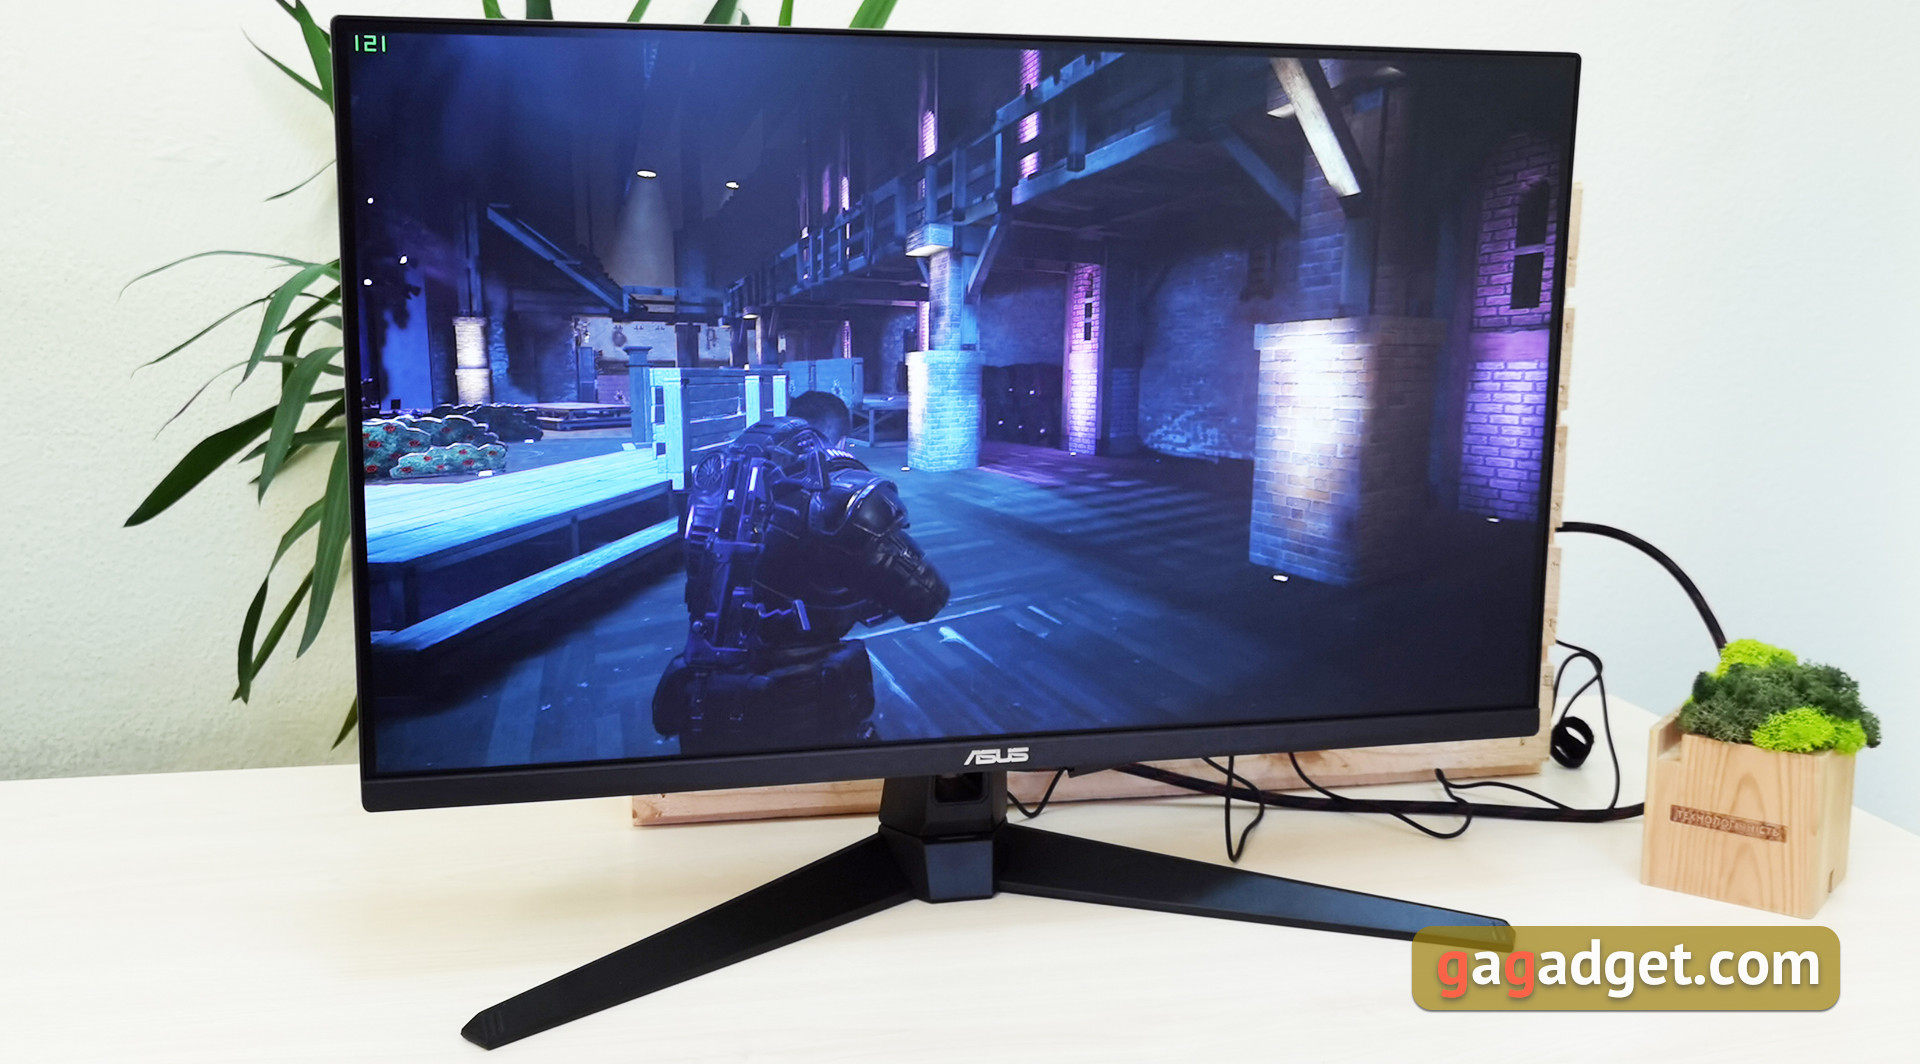 ASUS TUF Gaming VG279Q1A review: 27-inch gaming monitor with IPS panel and  165 Hz refresh rate